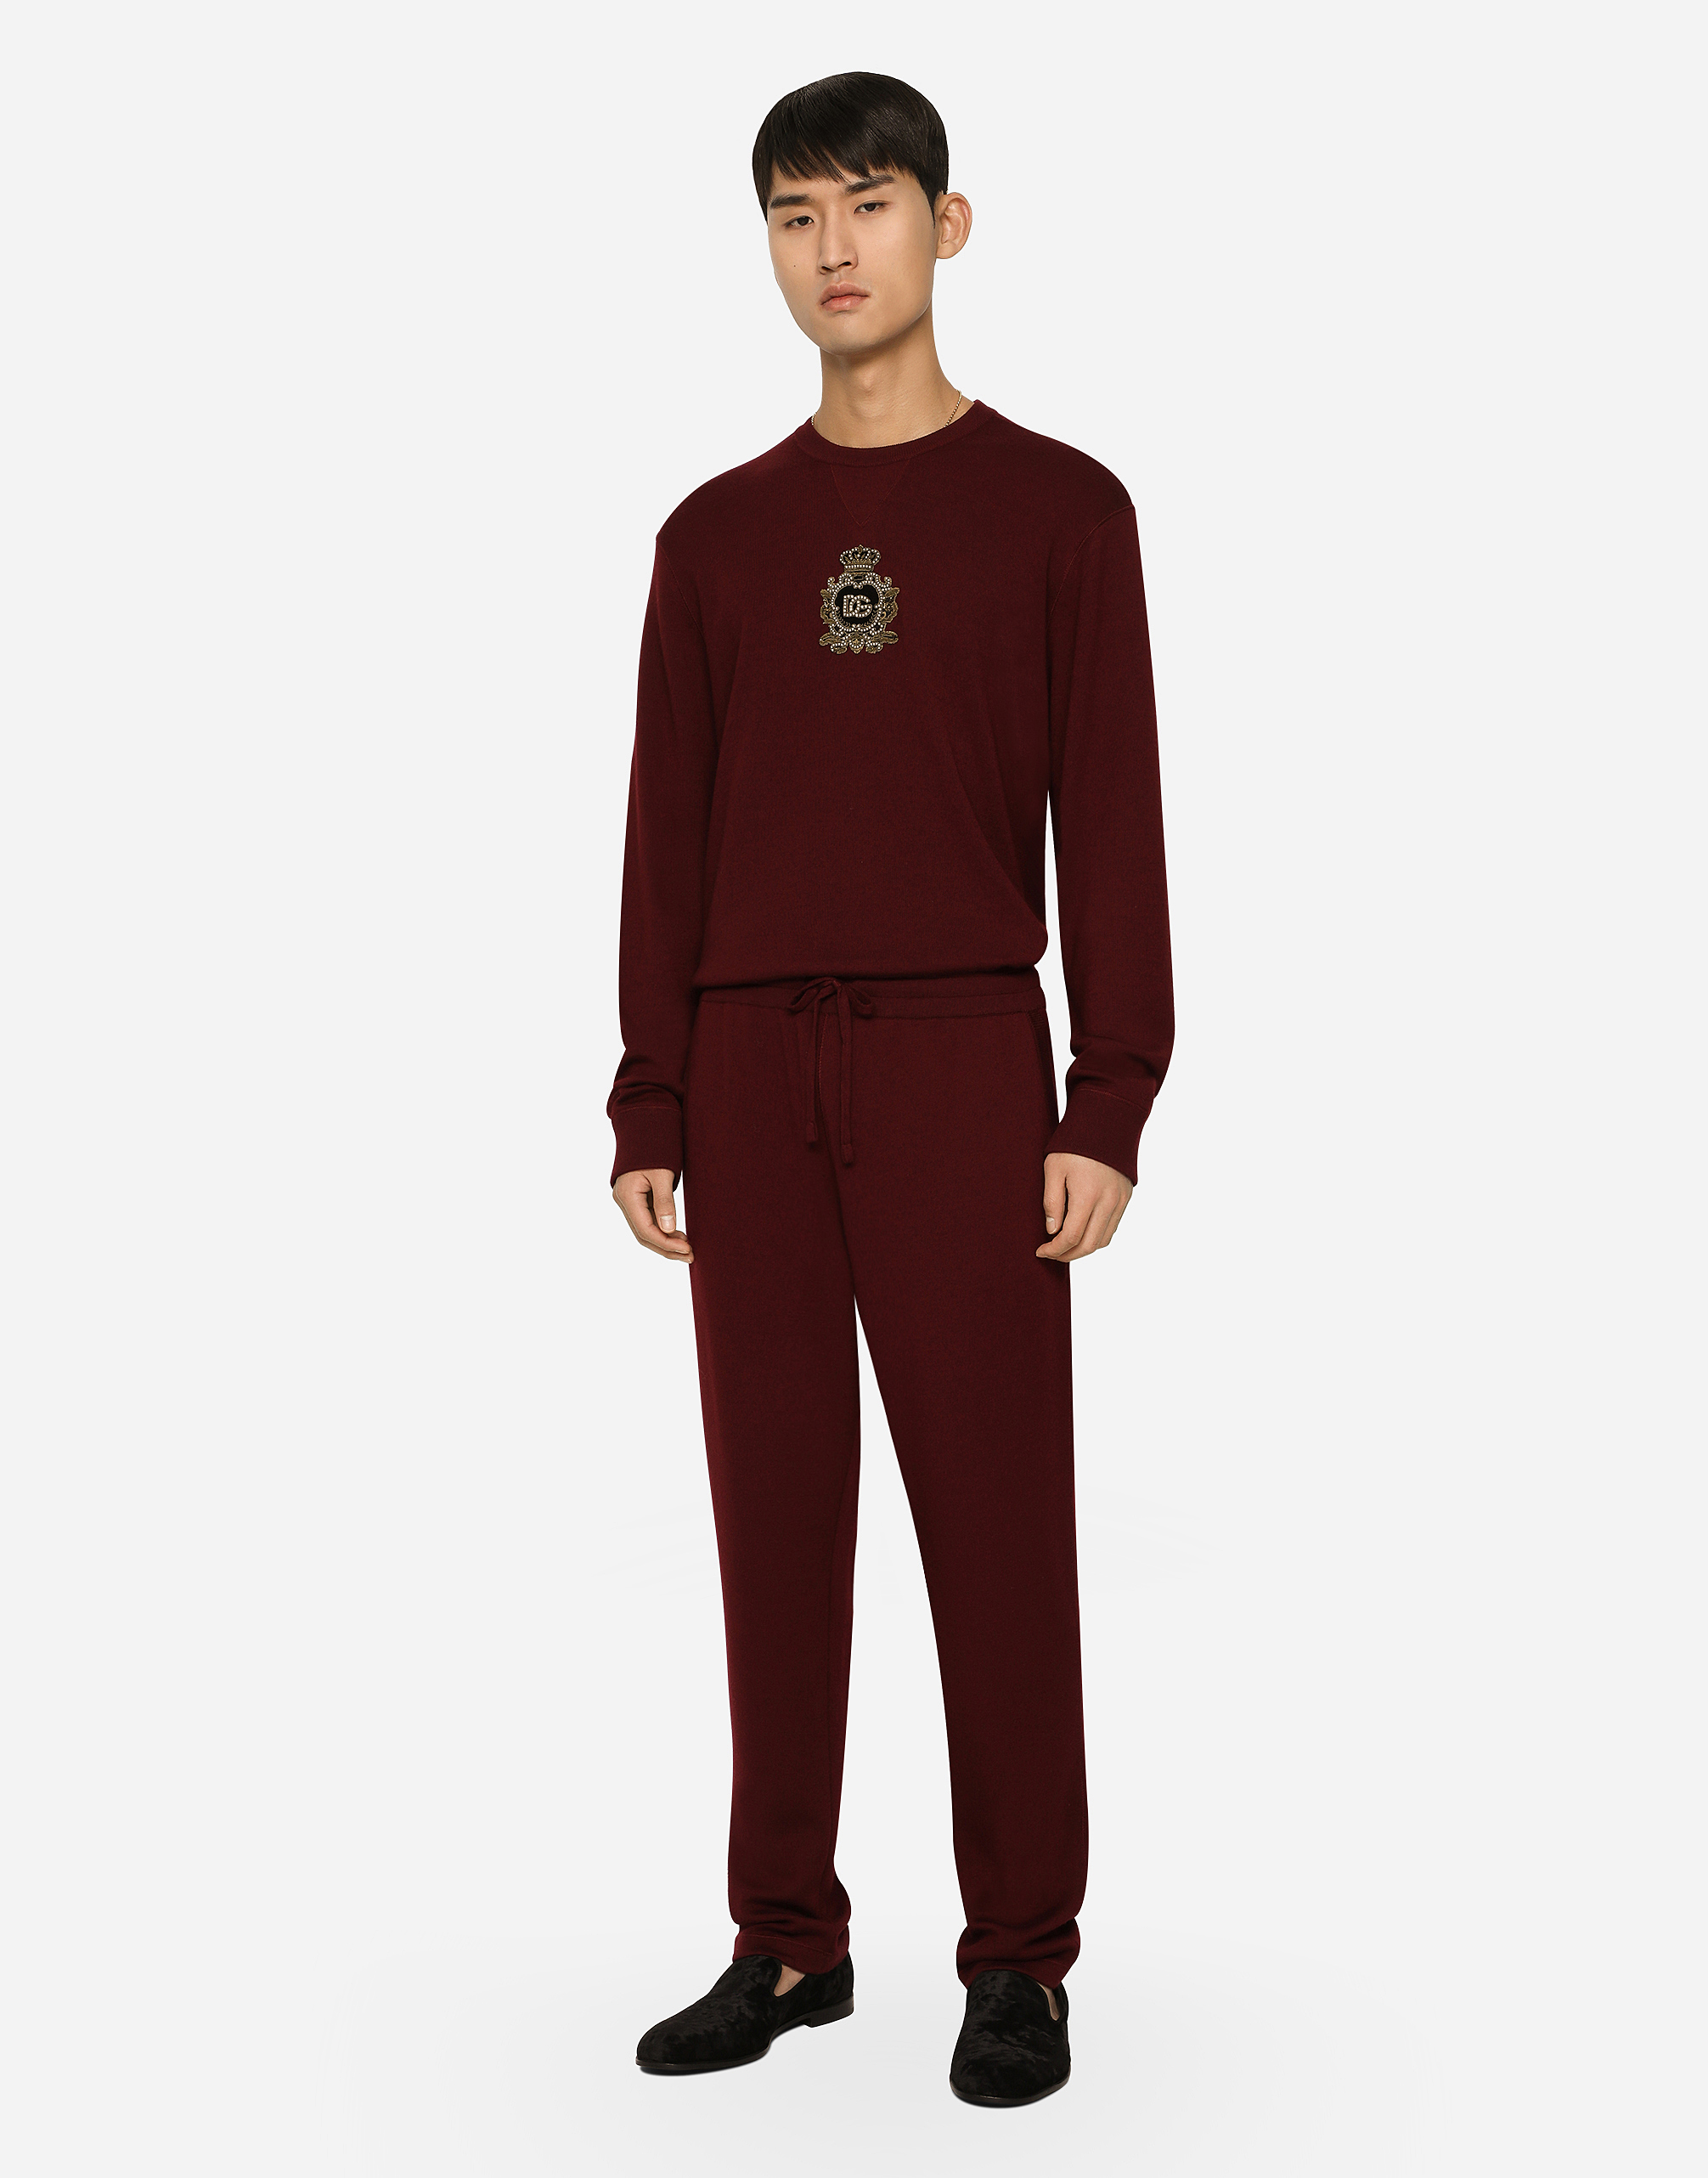 Wool and cashmere knit jogging pants in Bordeaux